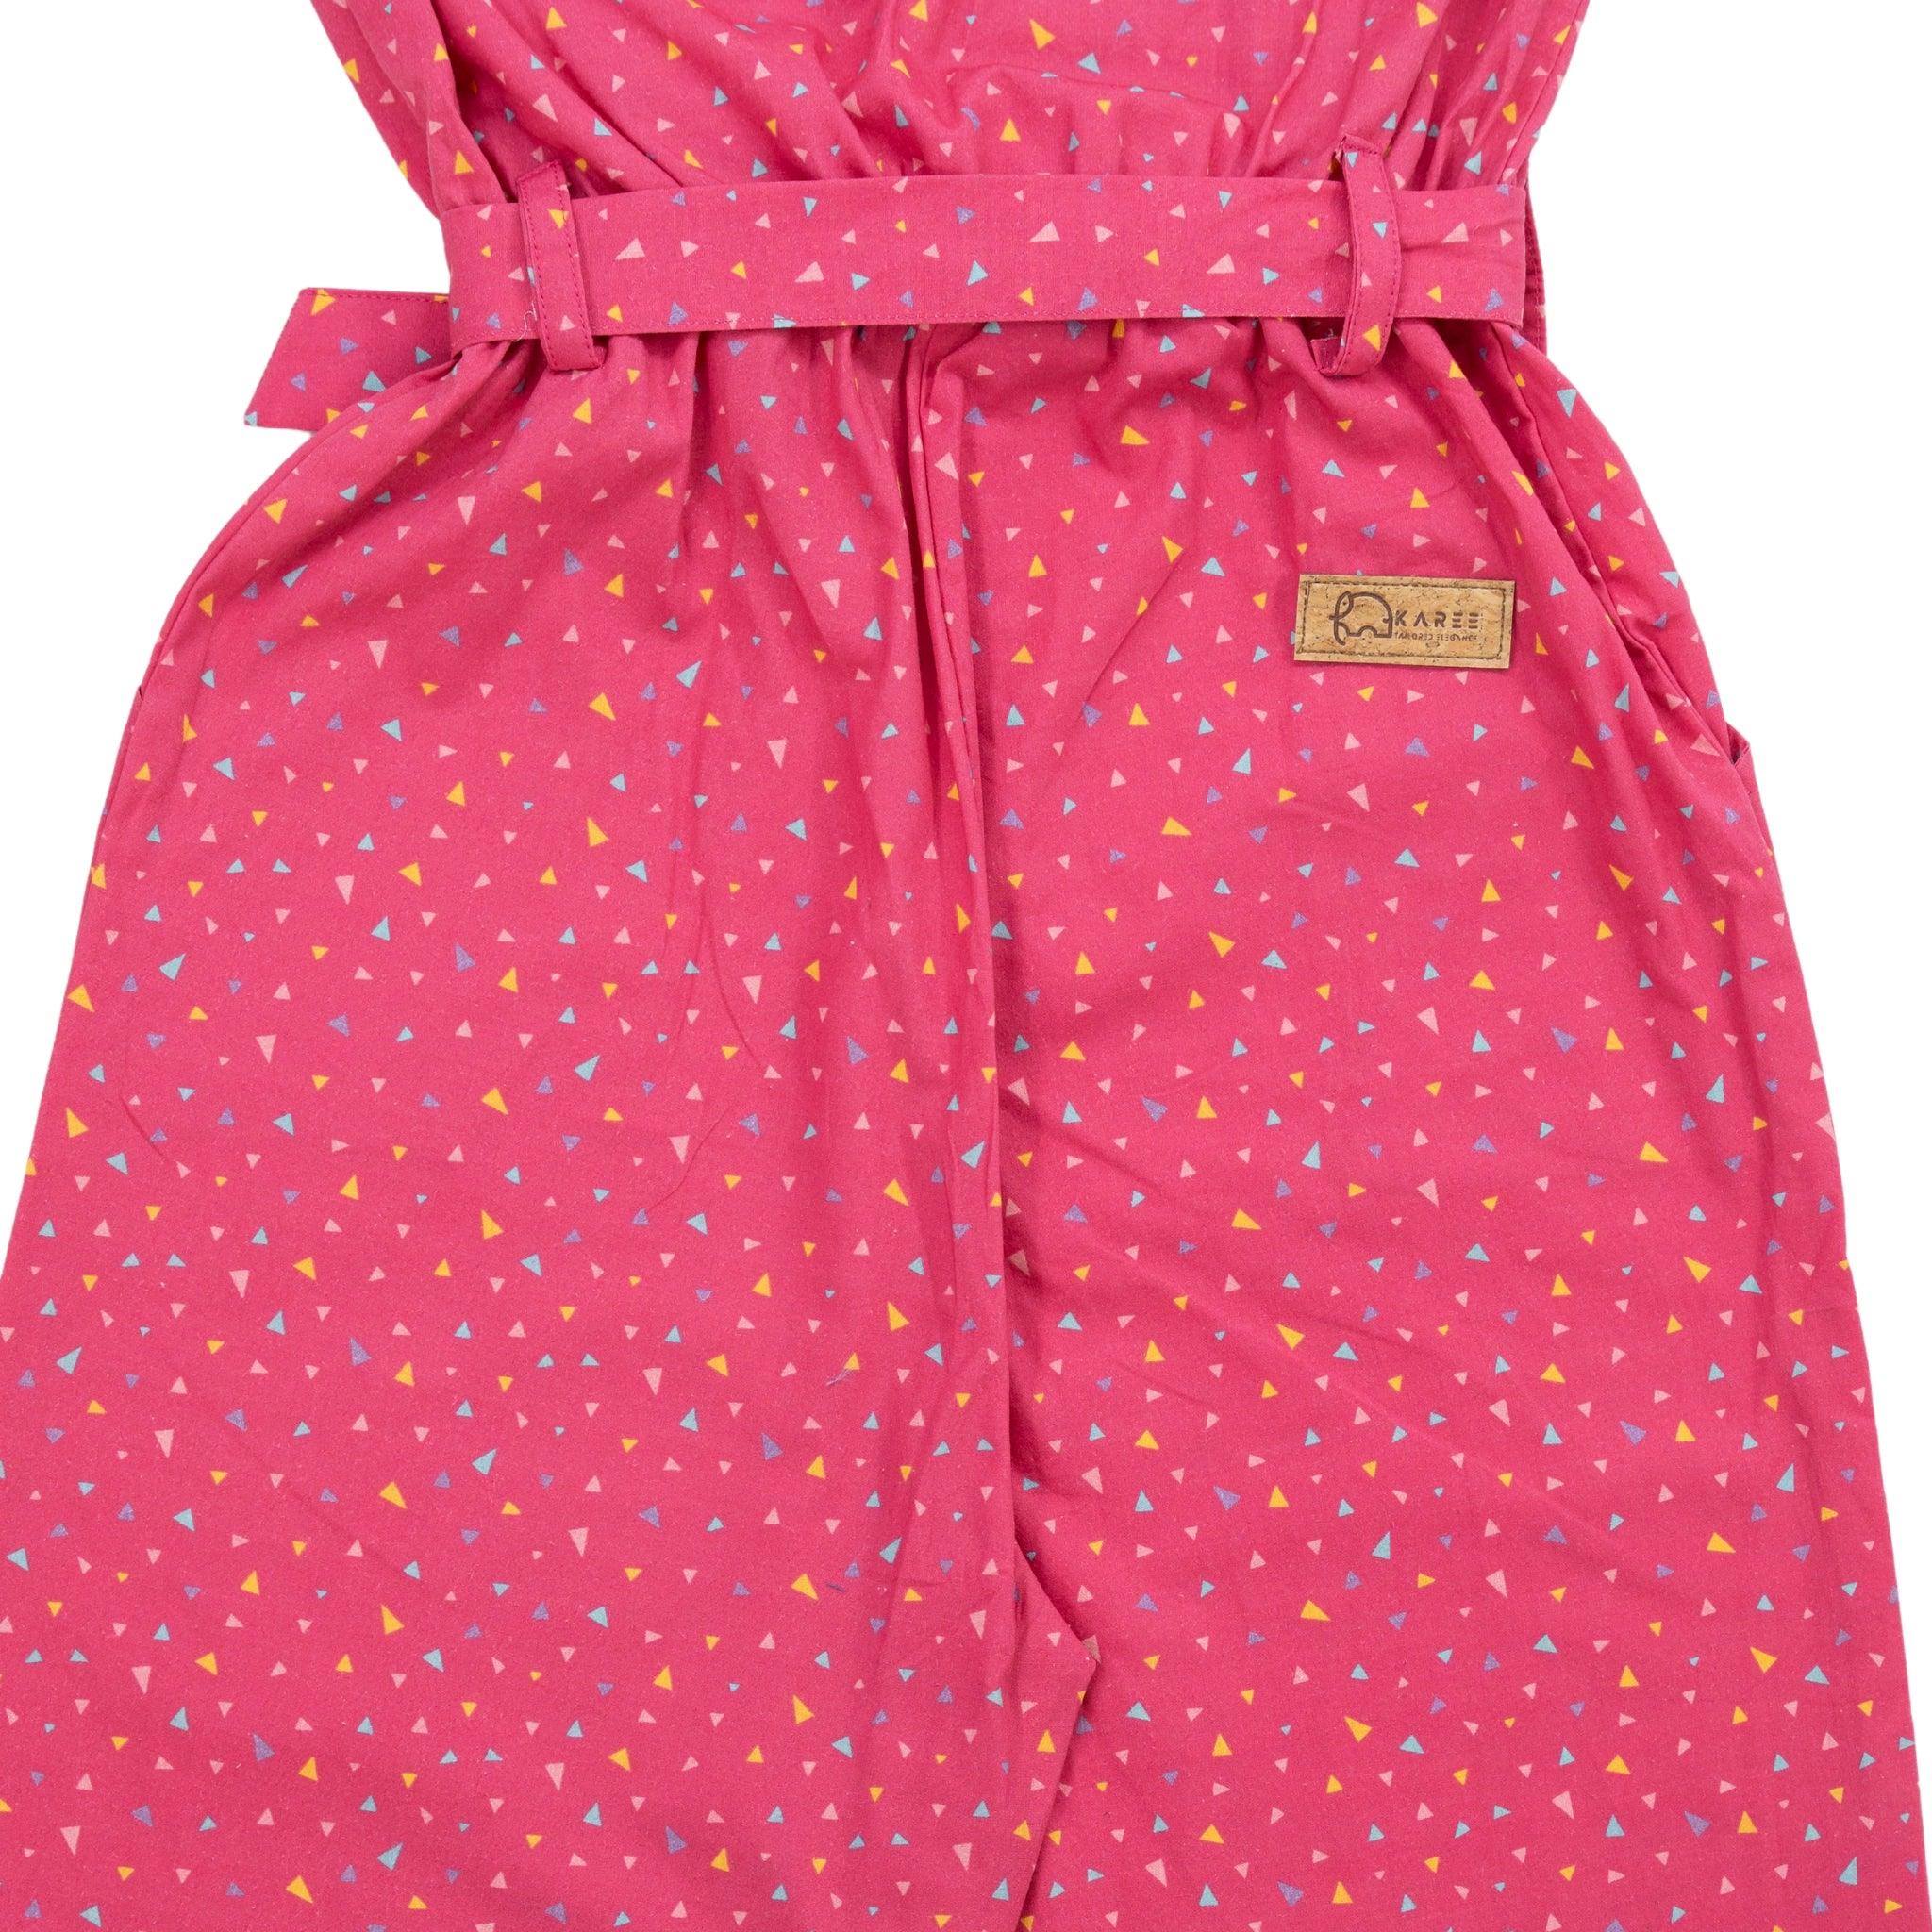 Close-up of a Red Rose cotton jumpsuit for girls with a triangle pattern, featuring a tied belt and a Karee label.